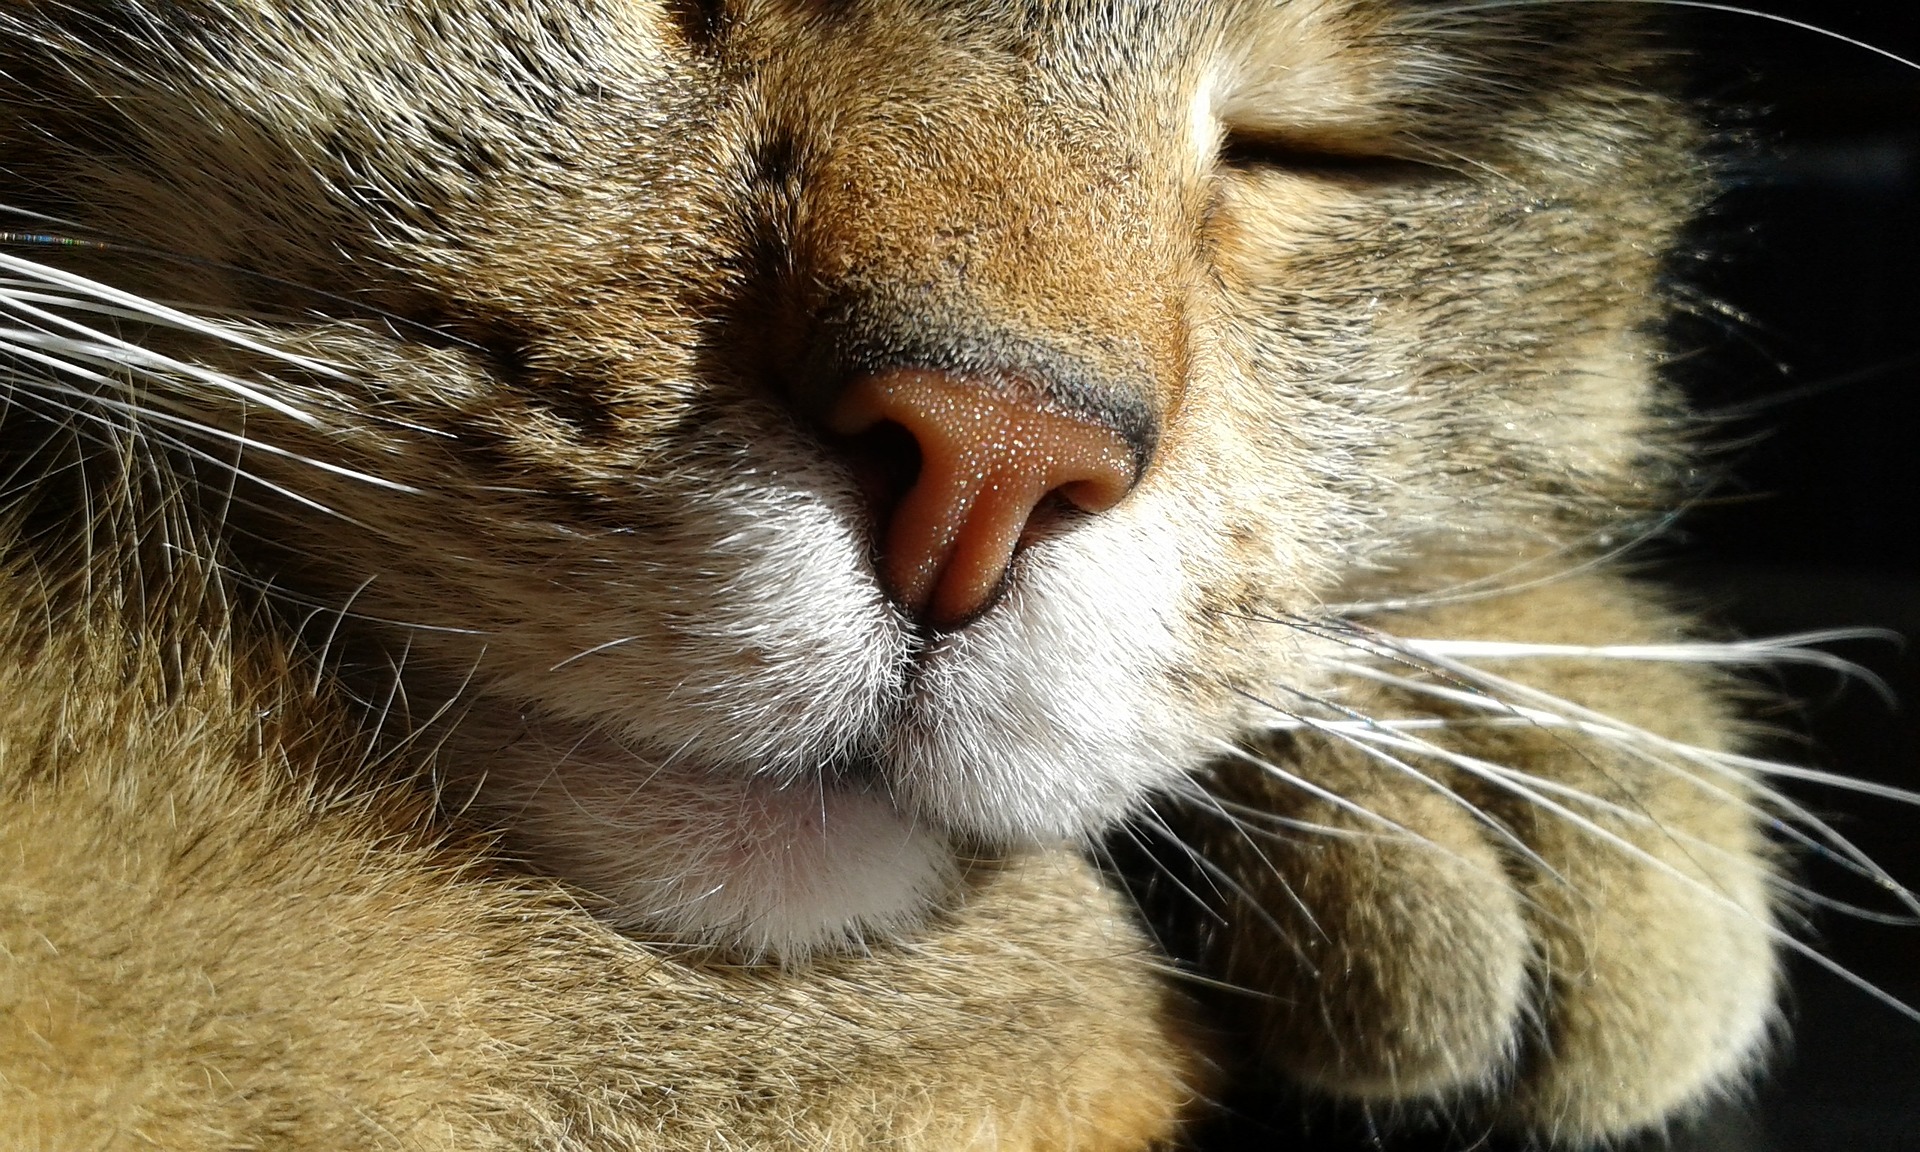 8 interesting facts about the cat noses and their sense of smell